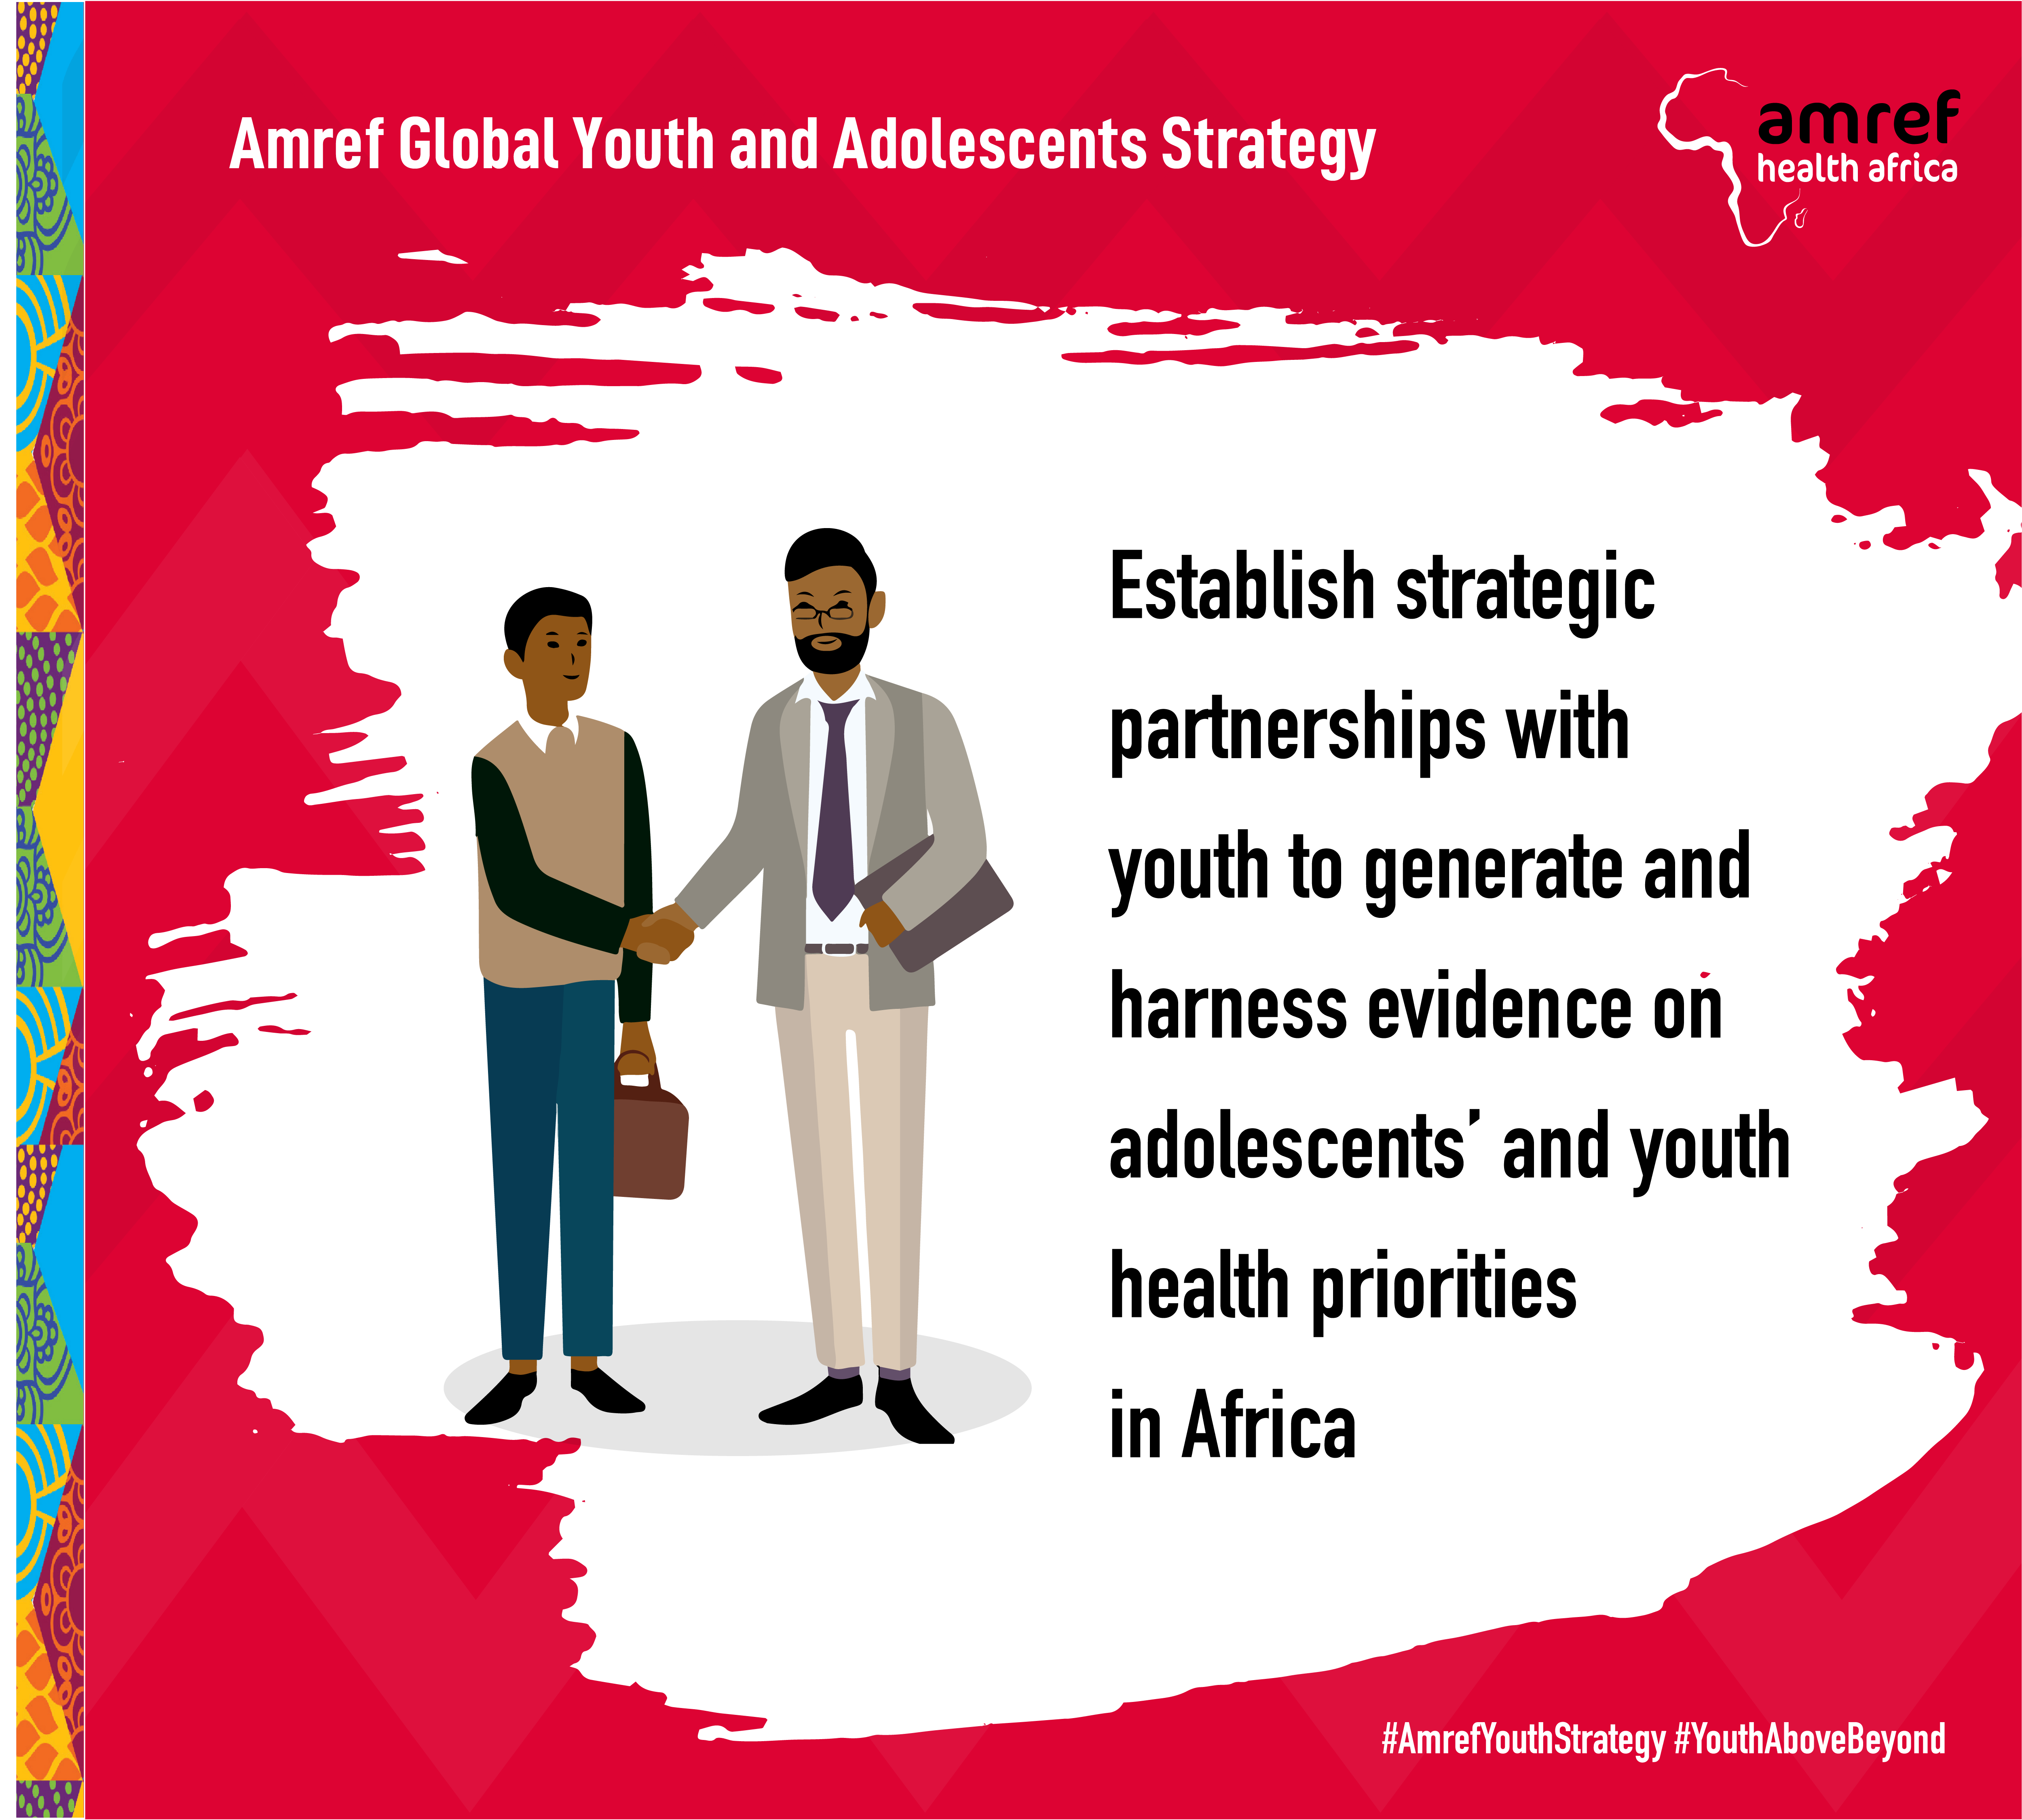 Amref Global Youth and Adolescents Strategy Launch